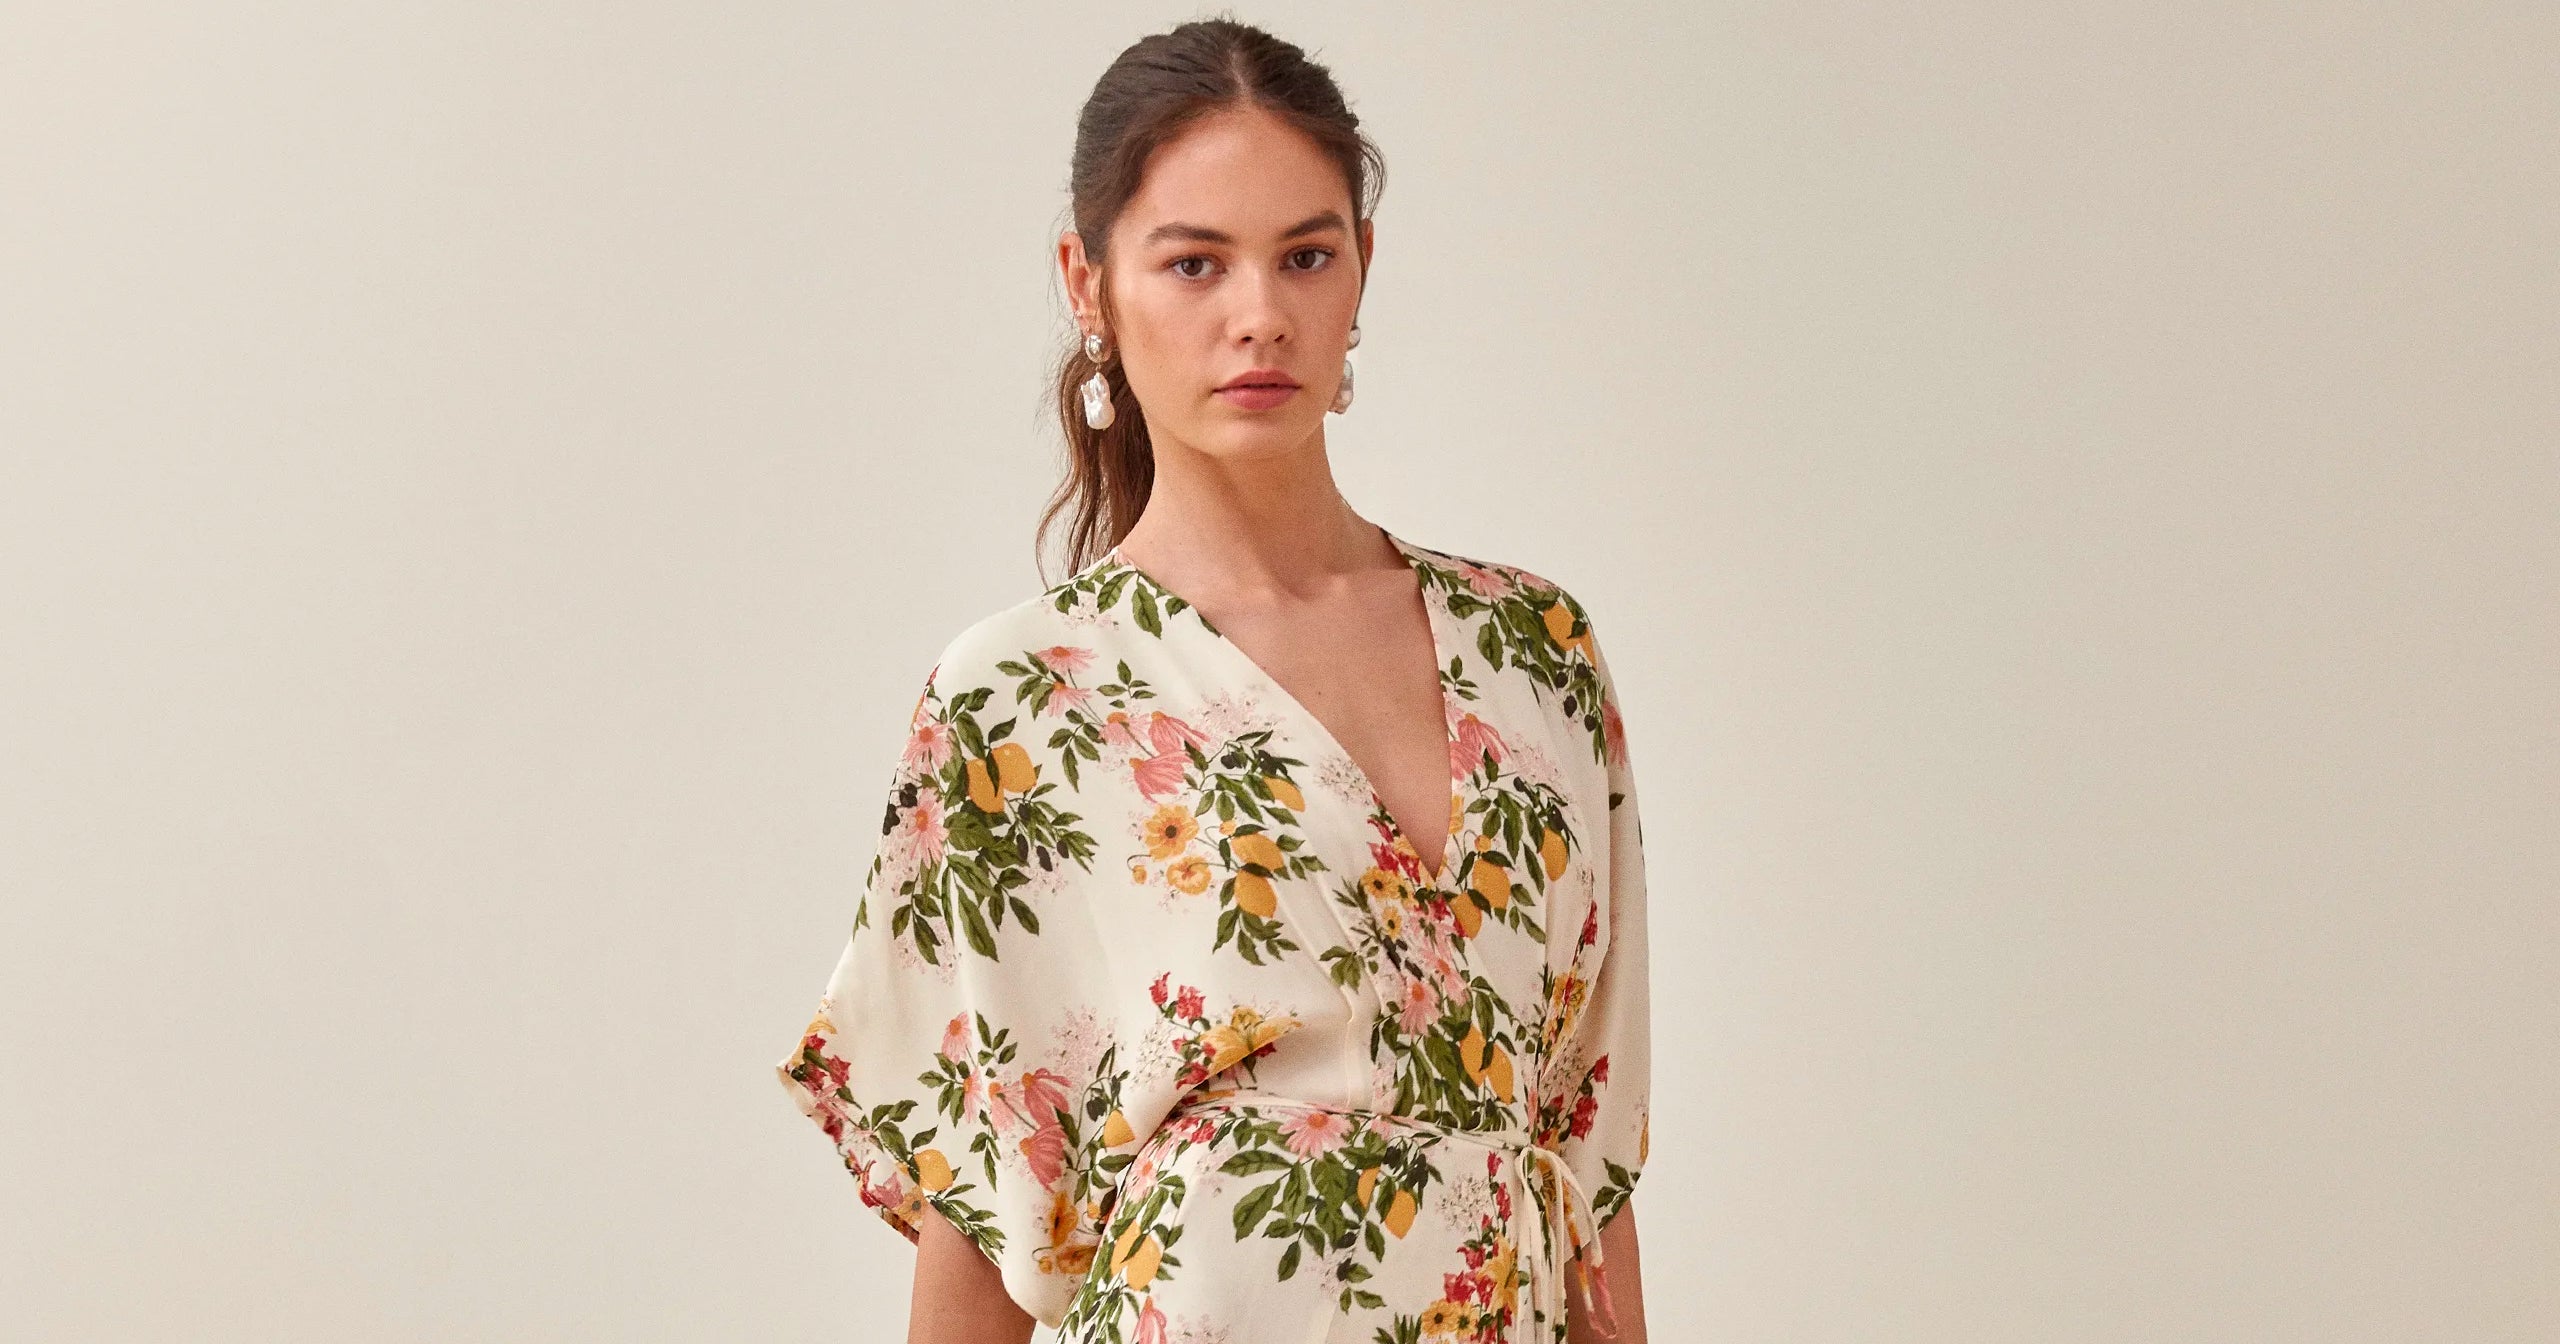 This Summer's Coolest Wedding Guest Dress Is Anything But Traditional